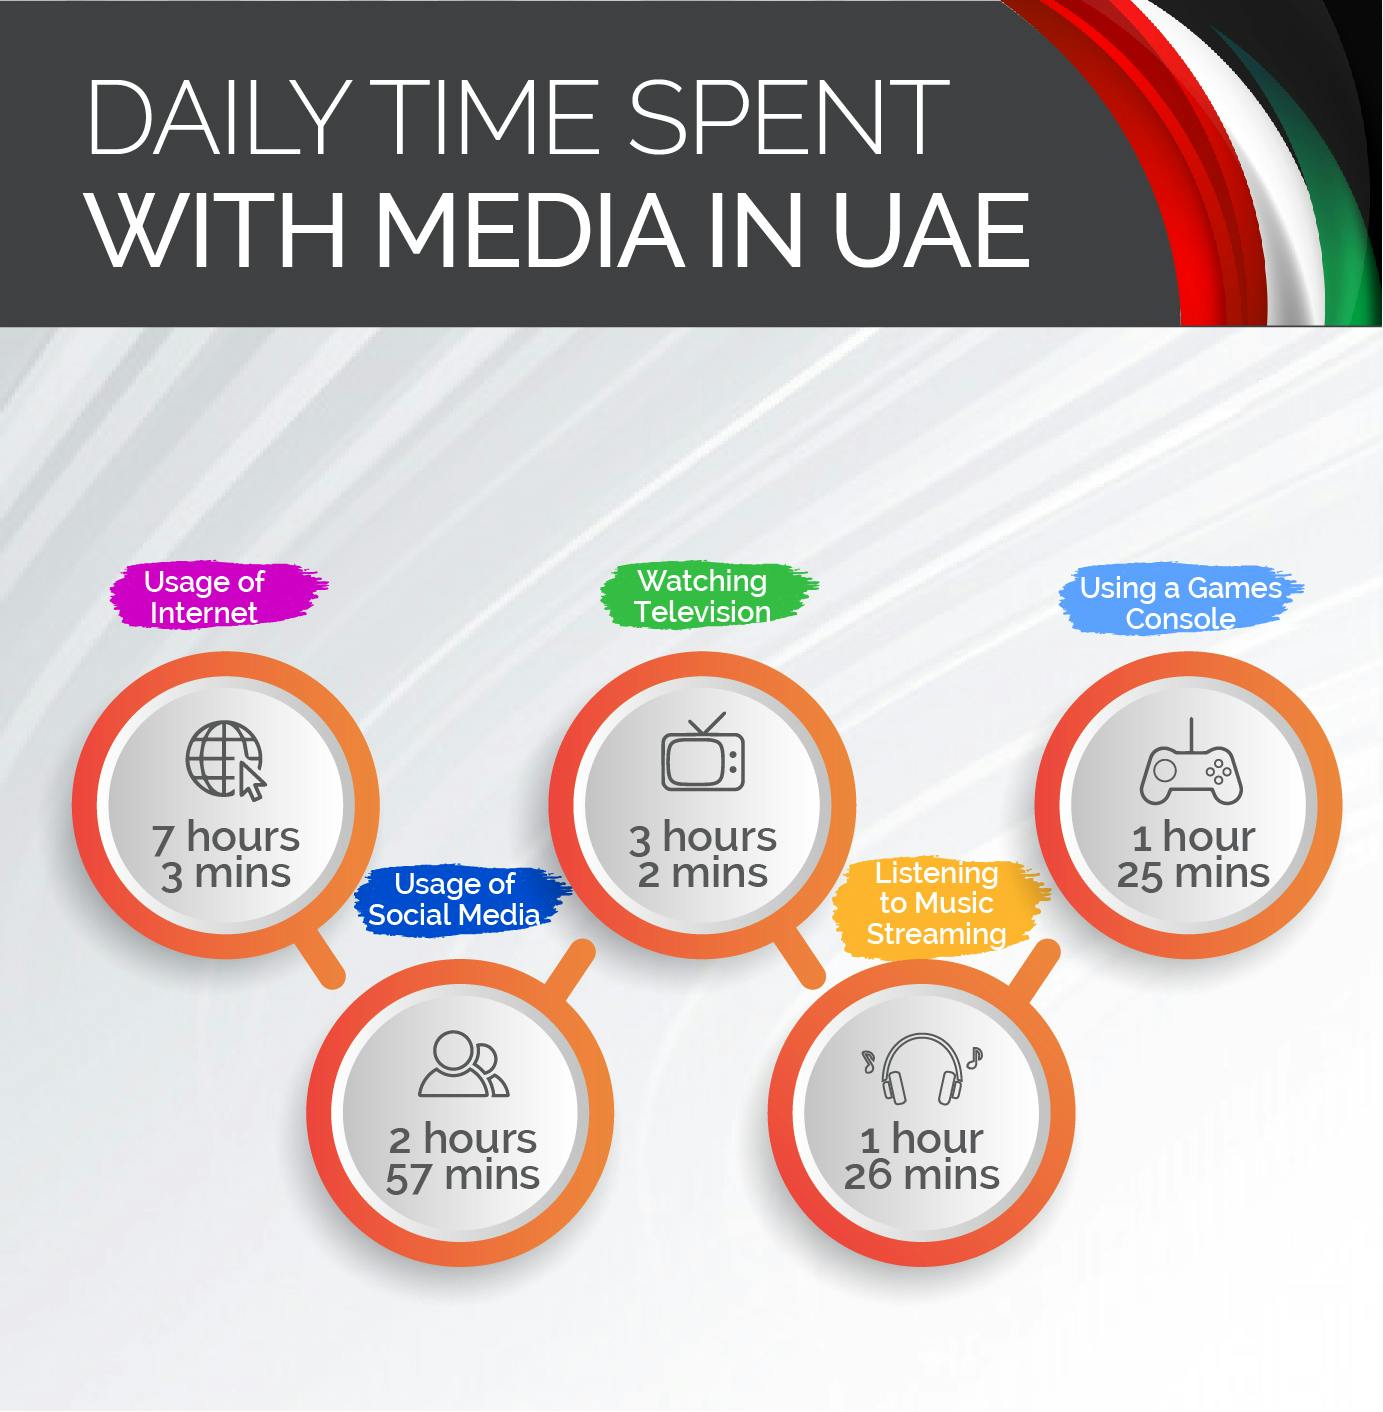 daily time spent with media in UAE 2020